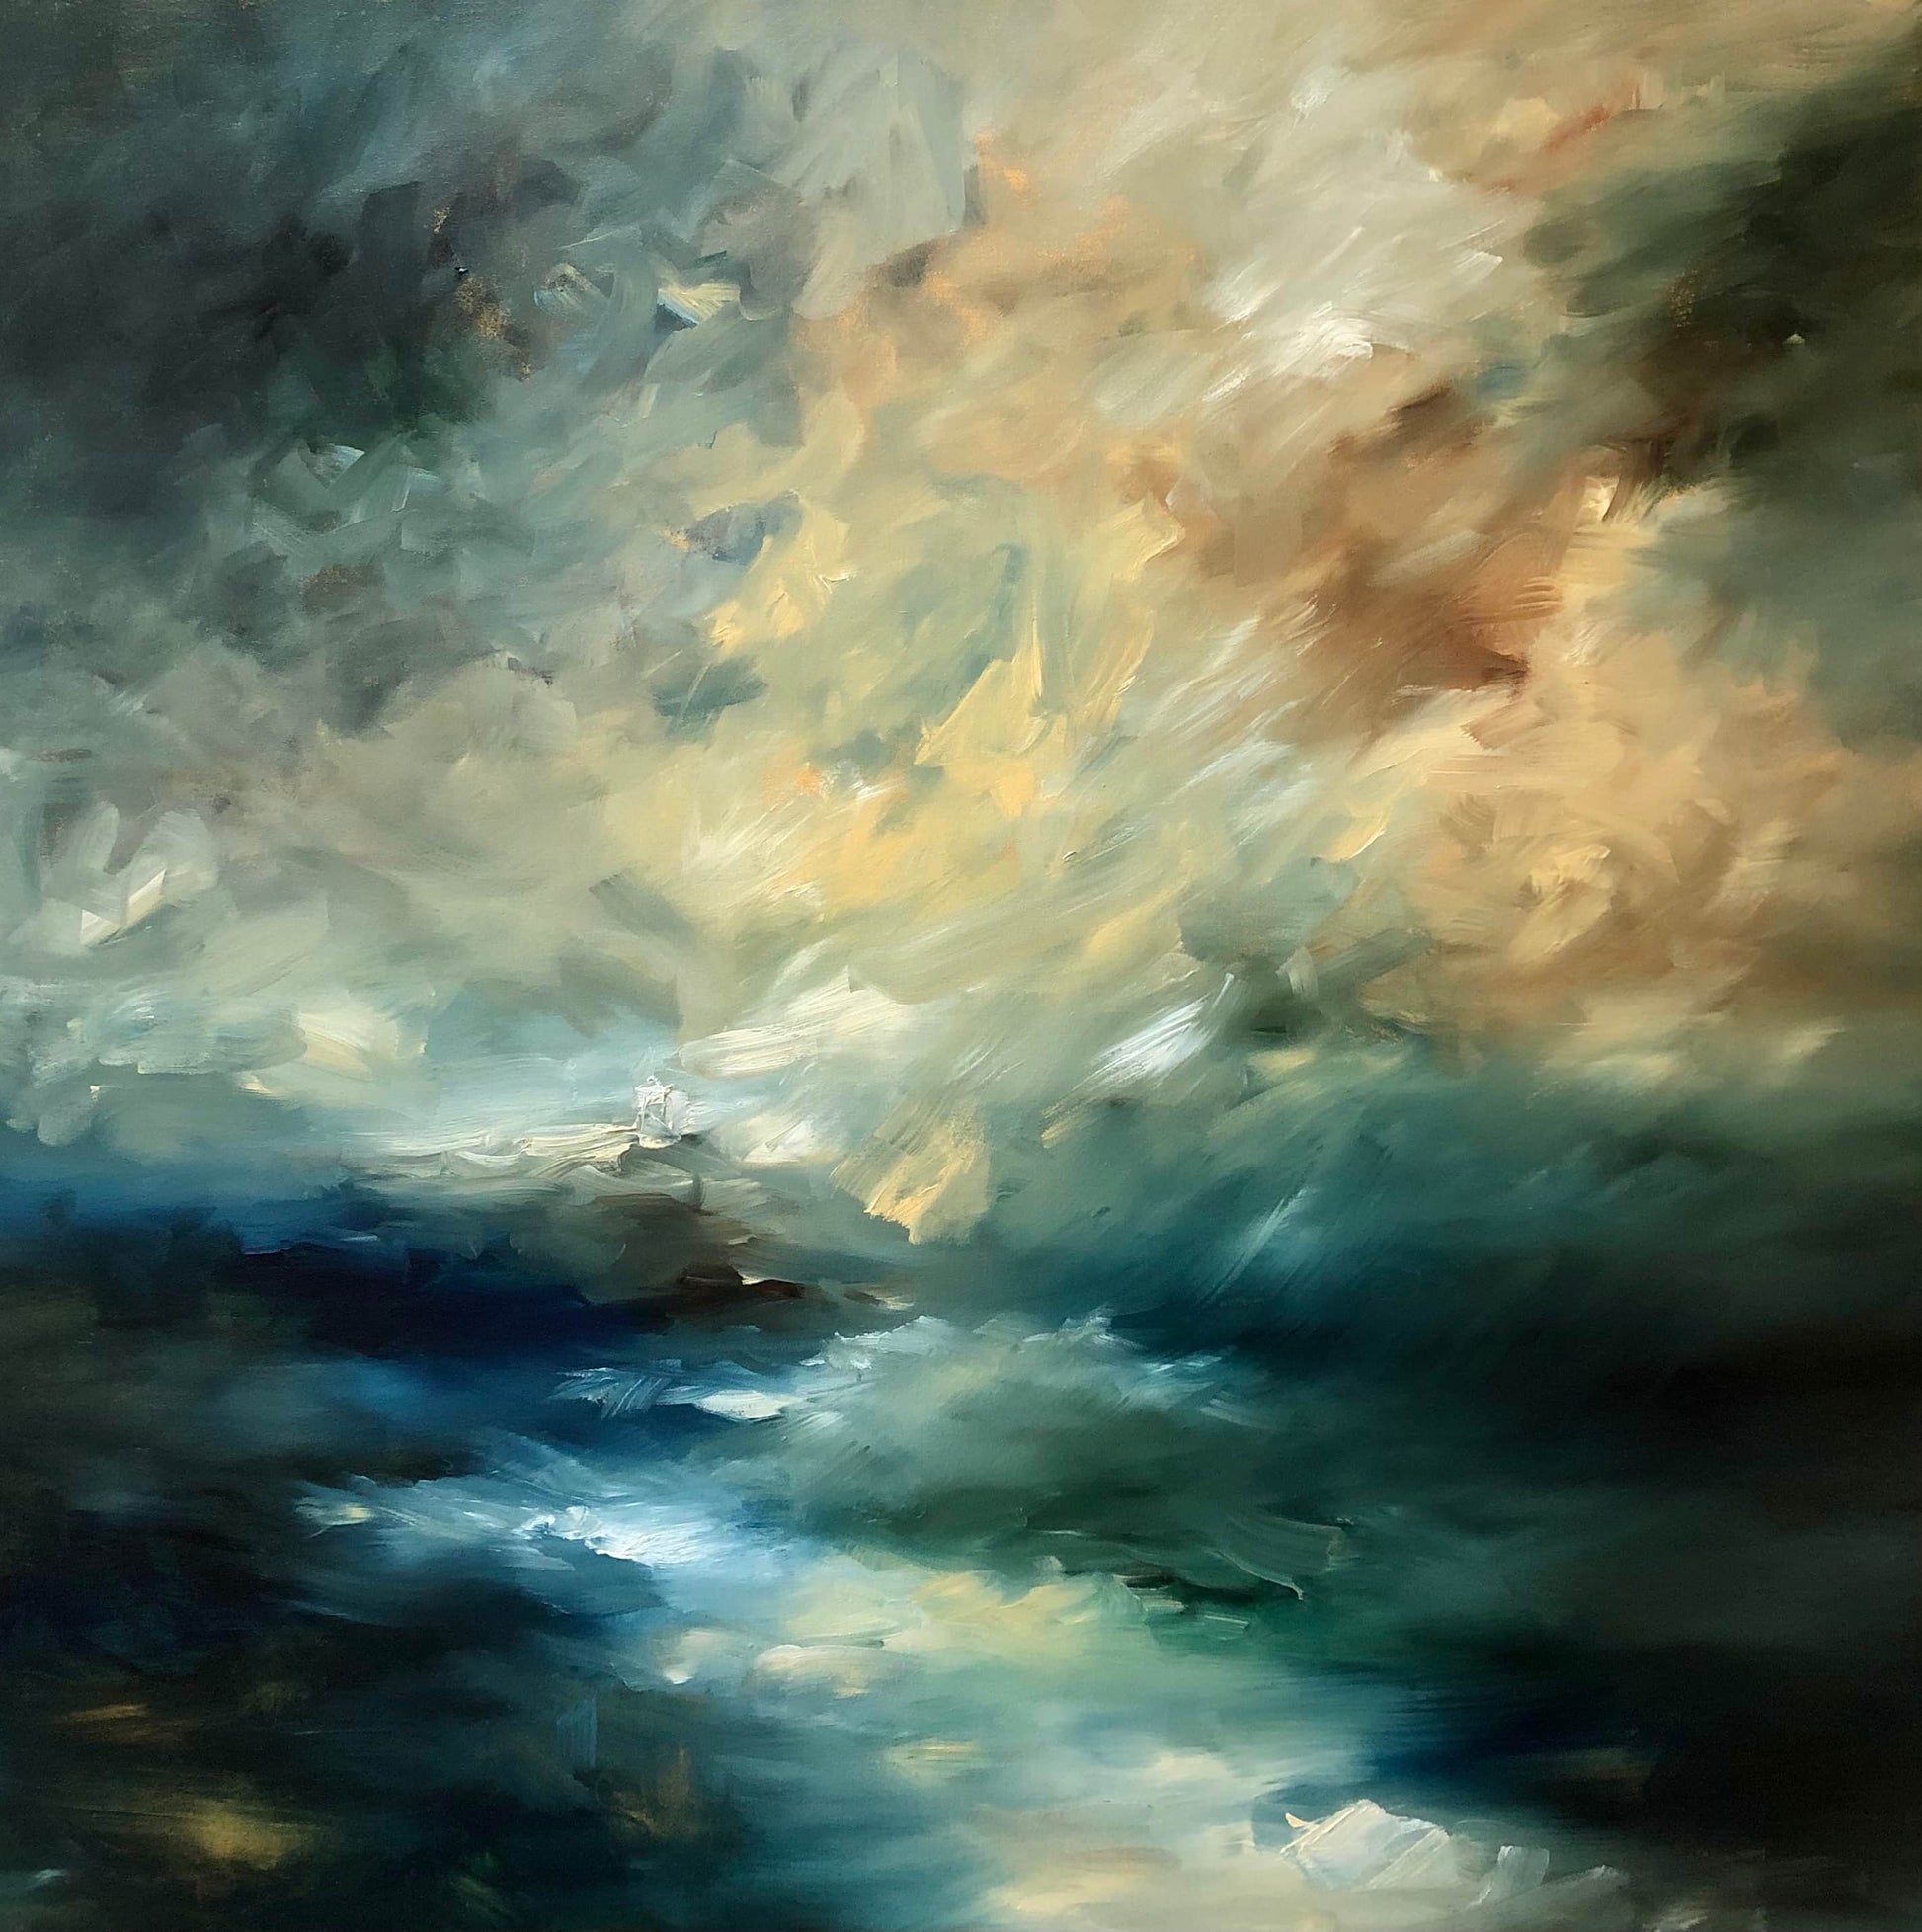 Abstract print of wild stormy weather at sea with light house in background